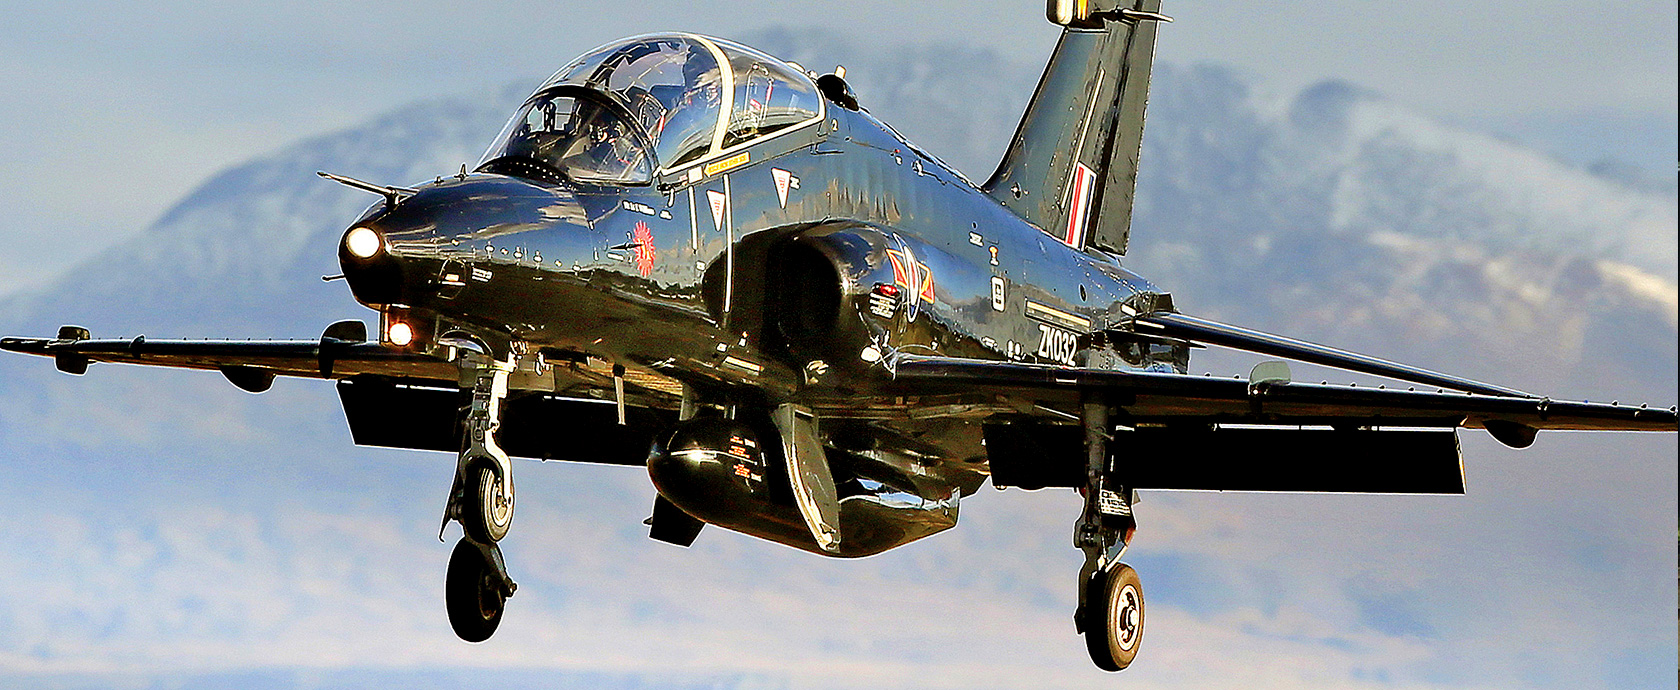 Image shows a Hawk T2 aircraft in flight.